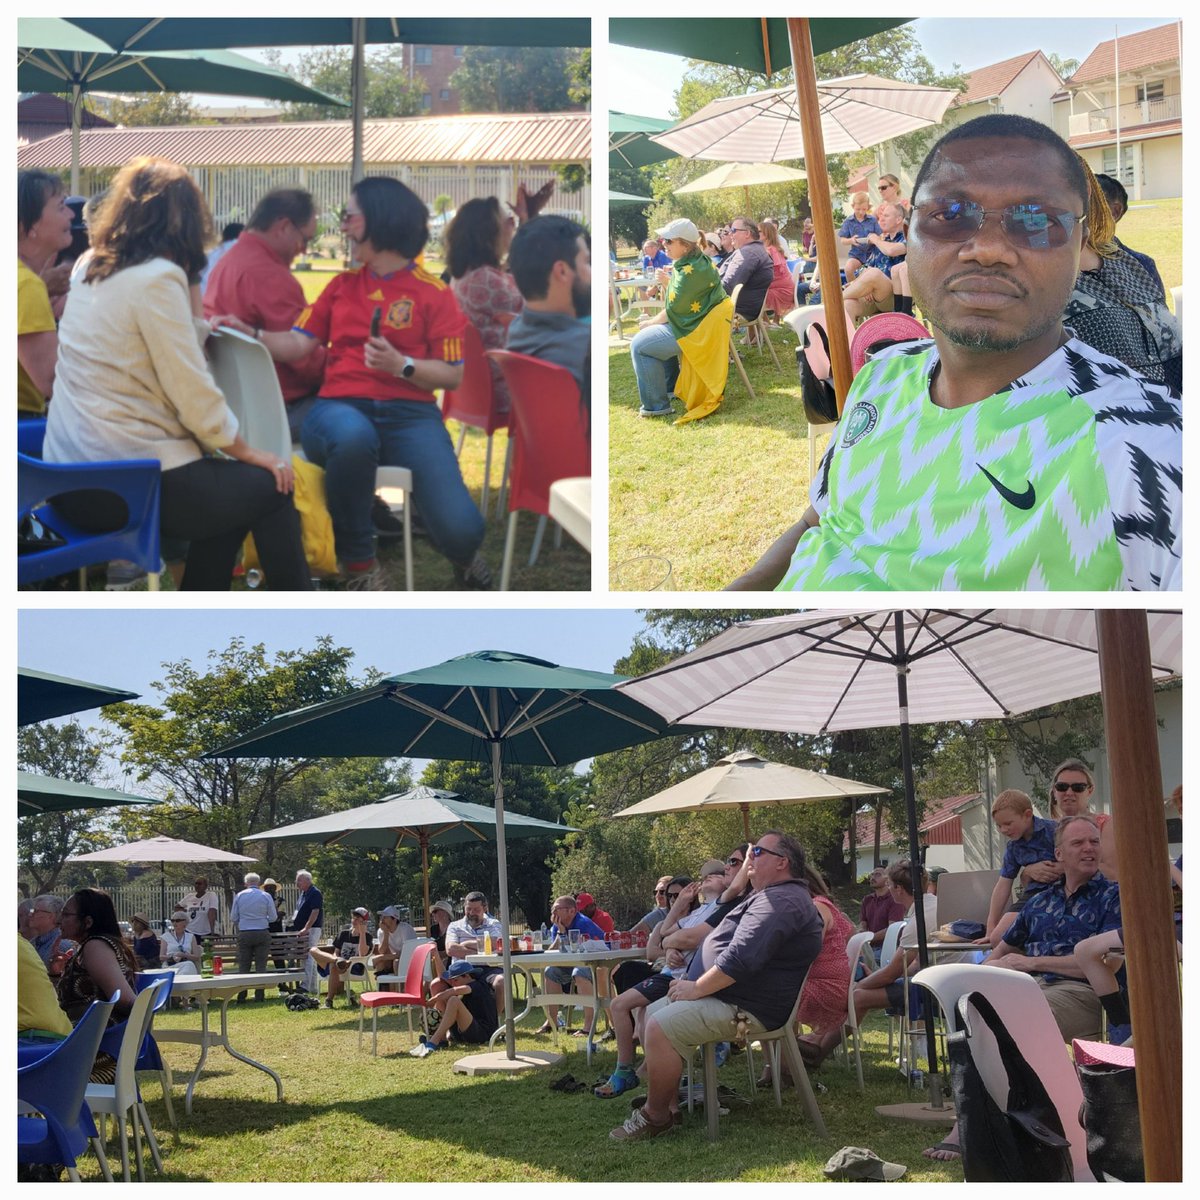 Thanks to H.E Amb Minoli Perera for hosting a public viewing of the finals of #womensWorldCup2023 at @AusEmbZim.

.@UNICEFZIMBABWE recognises #Sports4Development as a tool to promote participation, inclusion & skills development #ForEveryChild & young person in 🇿🇼.